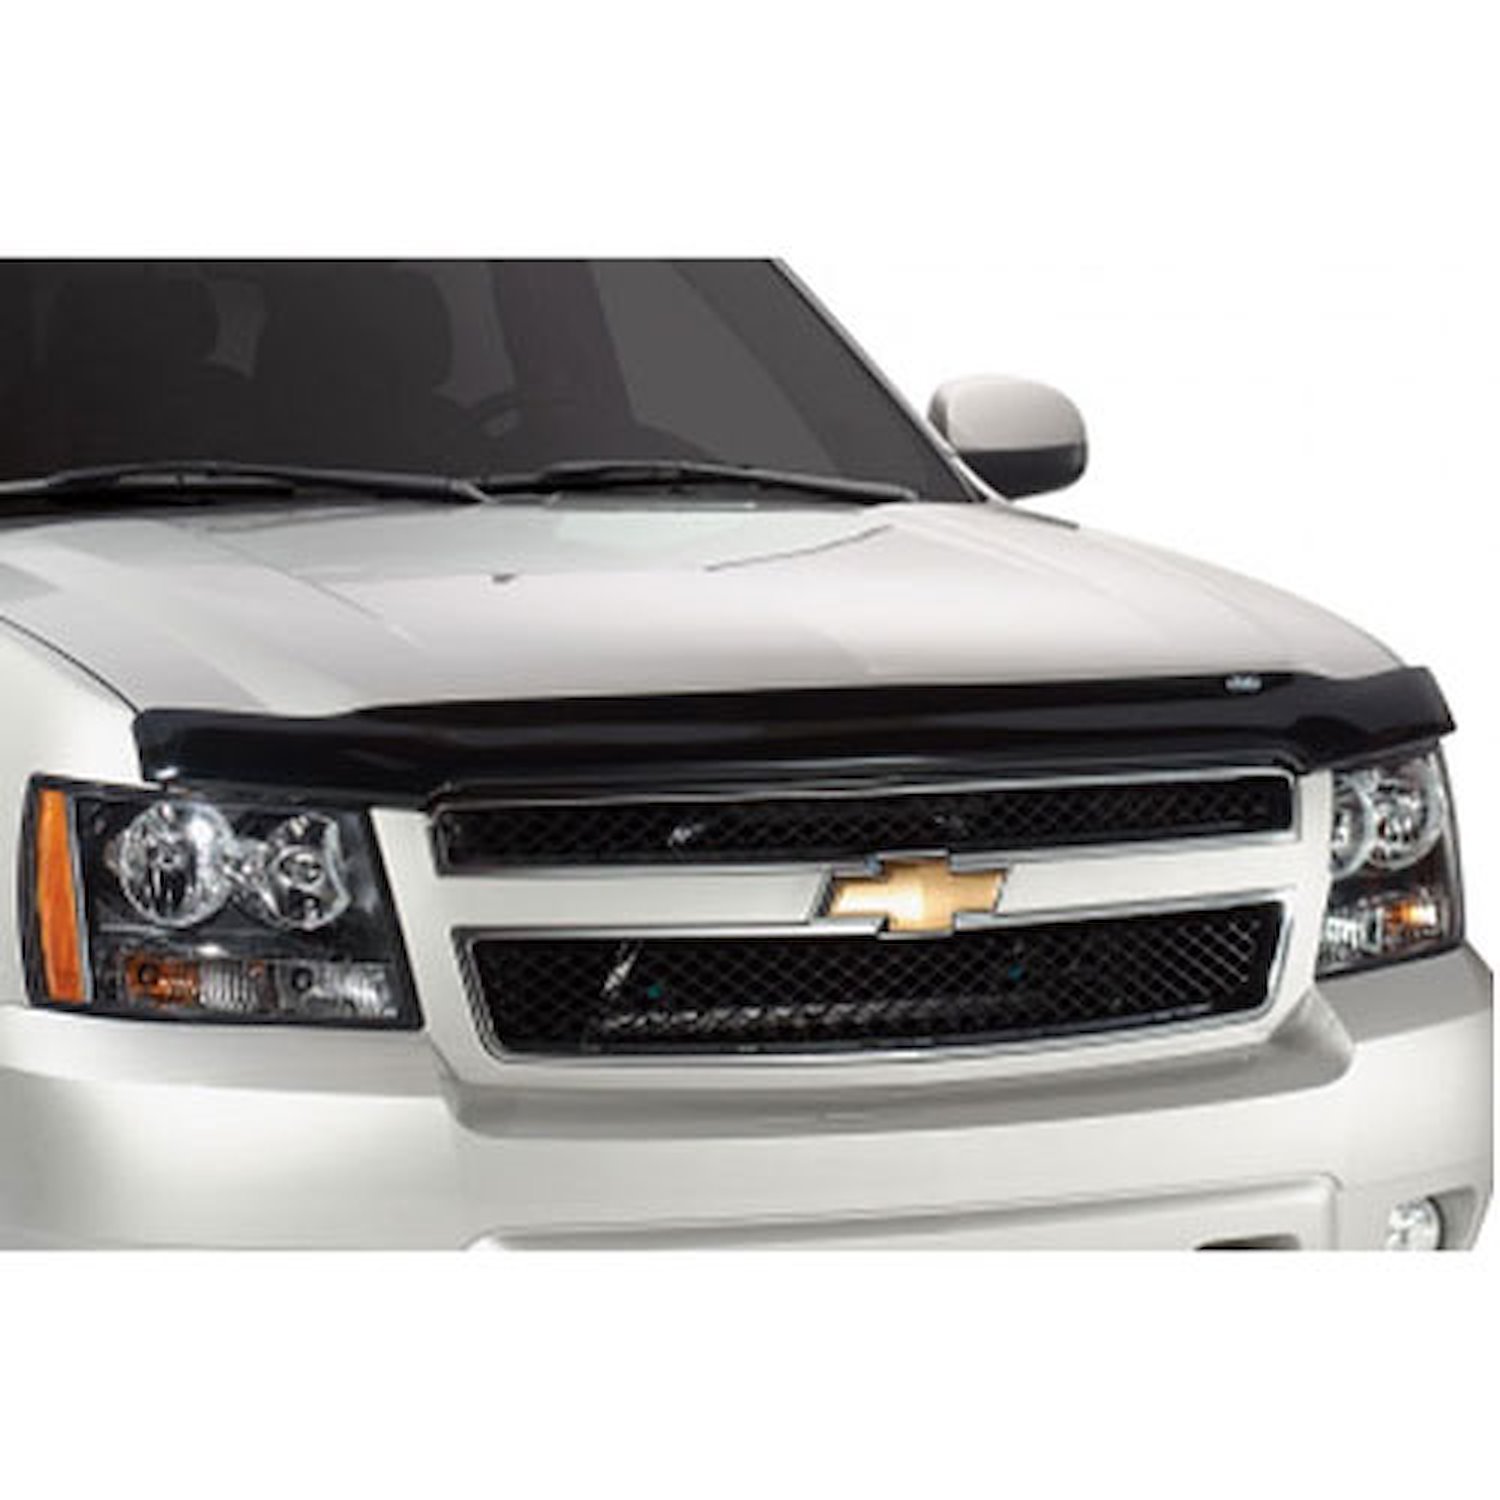 Bugflector Hood Shield for 2016-2017 Ford Explorer